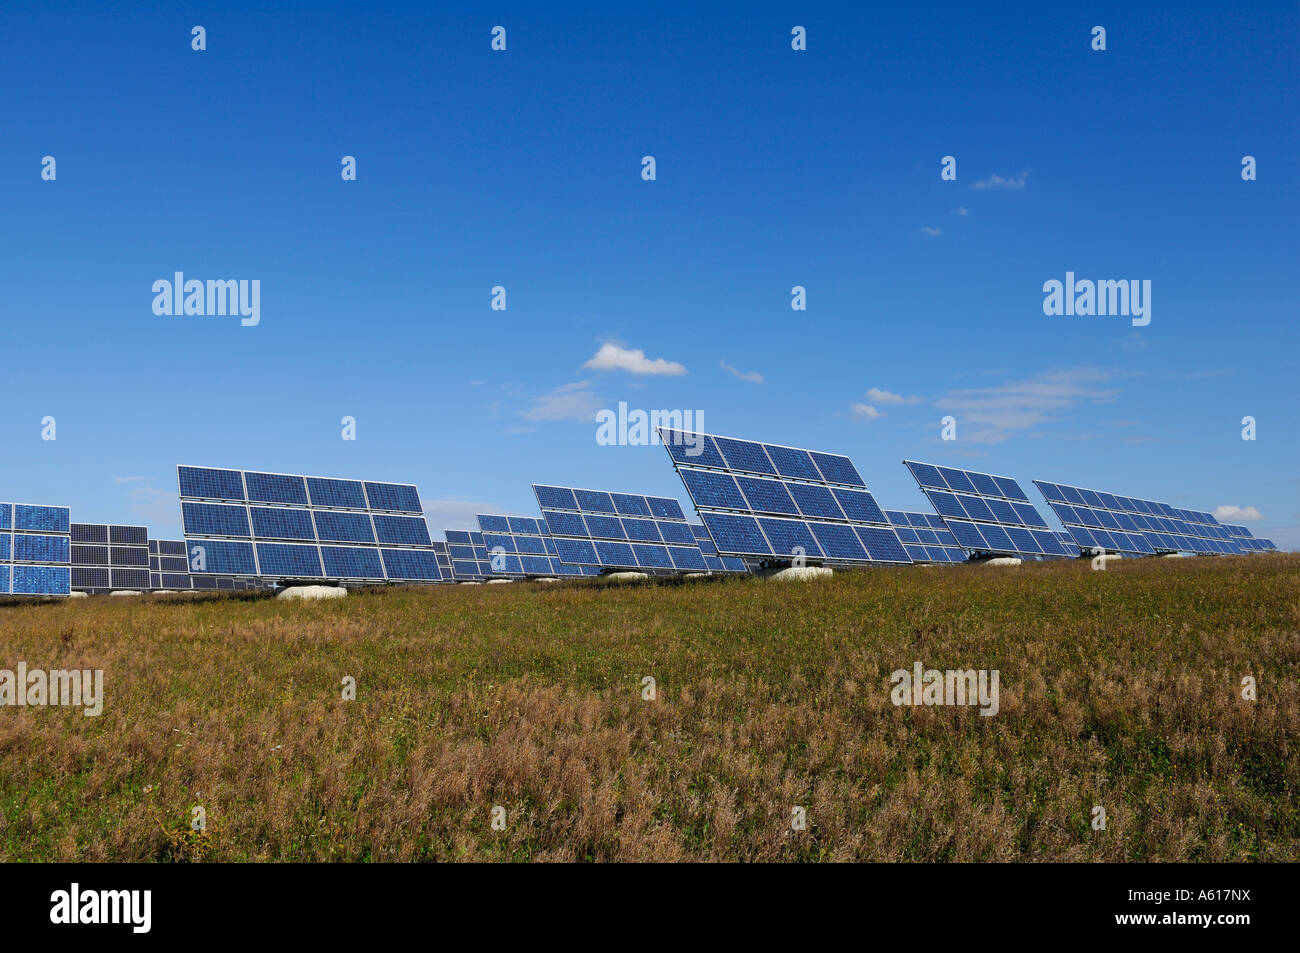 Photovoltaic plant for energy generation Stock Photo